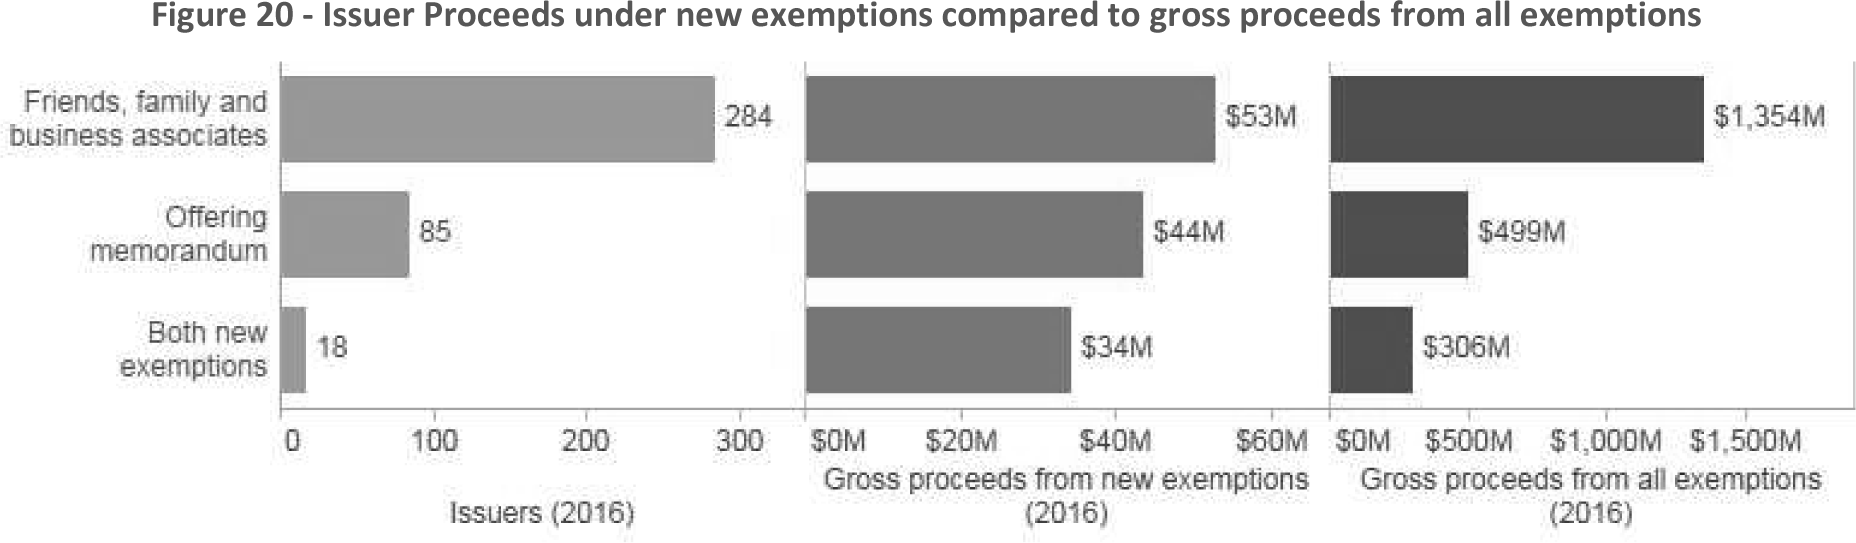 Figure 20 -- Issuer Proceeds under new exemptions compared to gross proceeds from all exemptions